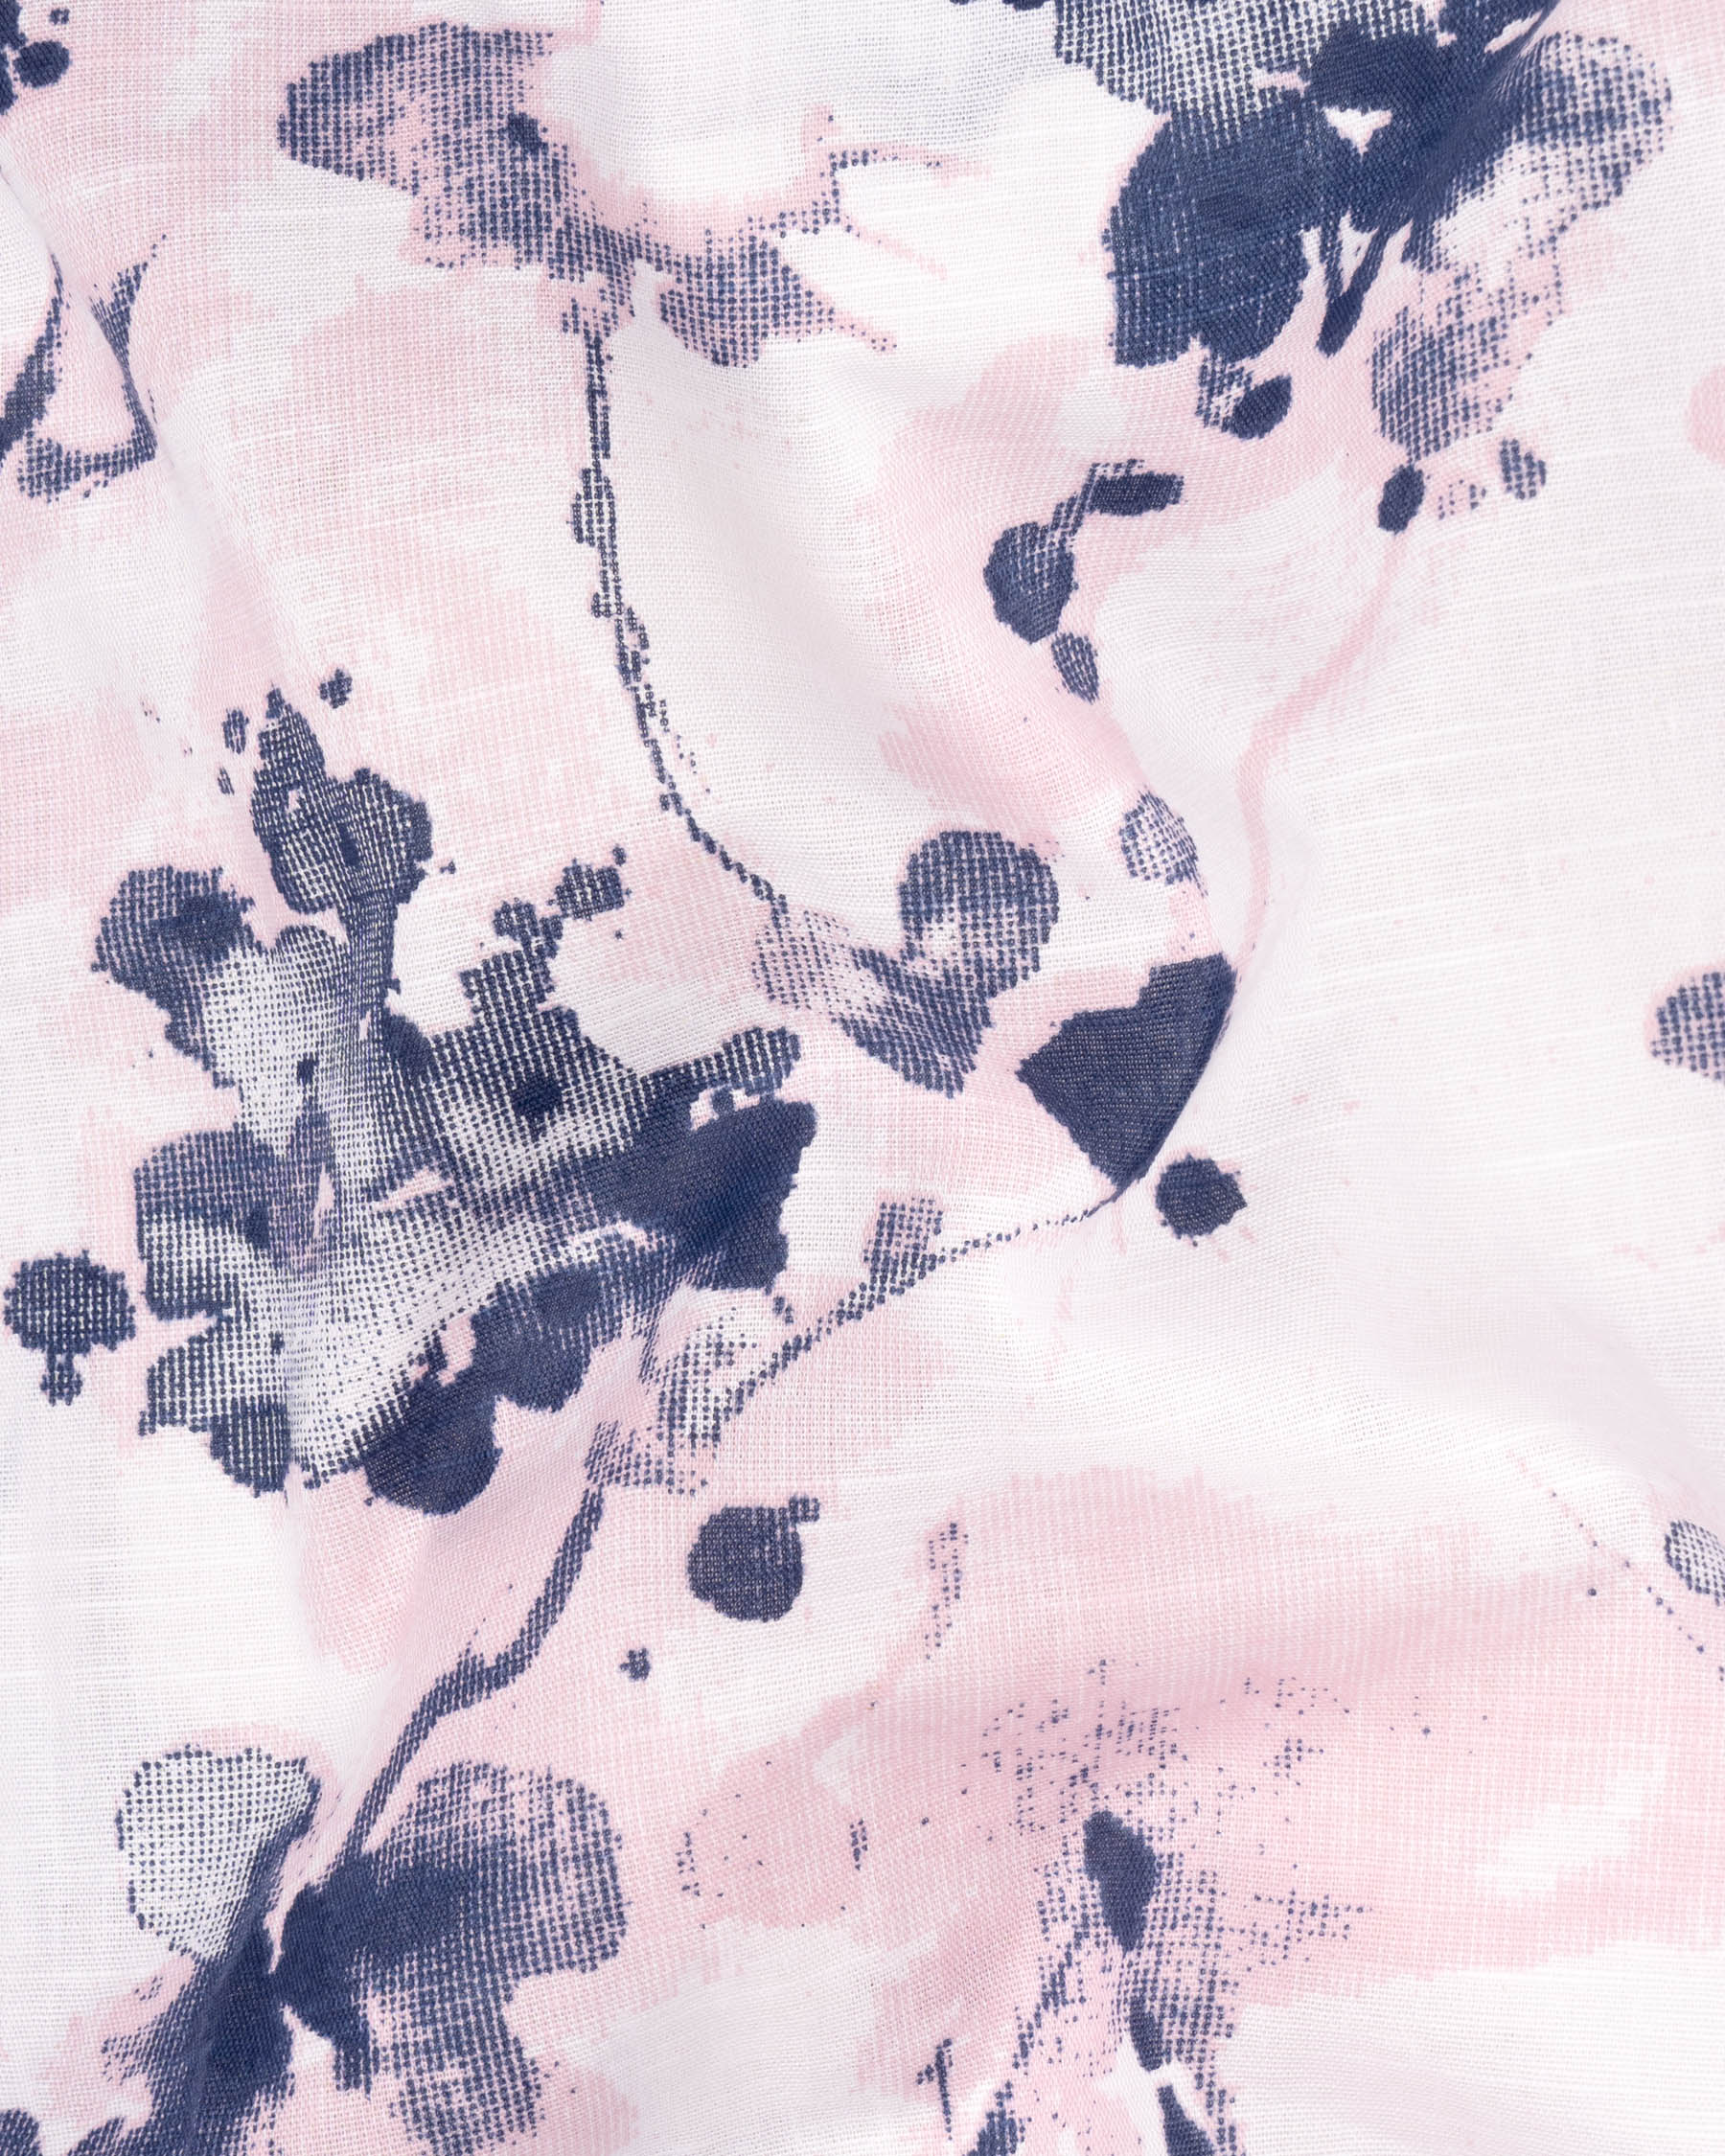 Oyster Pink Floral Printed Luxurious Linen Shirt 6293-M-38, 6293-M-H-38, 6293-M-39, 6293-M-H-39, 6293-M-40, 6293-M-H-40, 6293-M-42, 6293-M-H-42, 6293-M-44, 6293-M-H-44, 6293-M-46, 6293-M-H-46, 6293-M-48, 6293-M-H-48, 6293-M-50, 6293-M-H-50, 6293-M-52, 6293-M-H-52